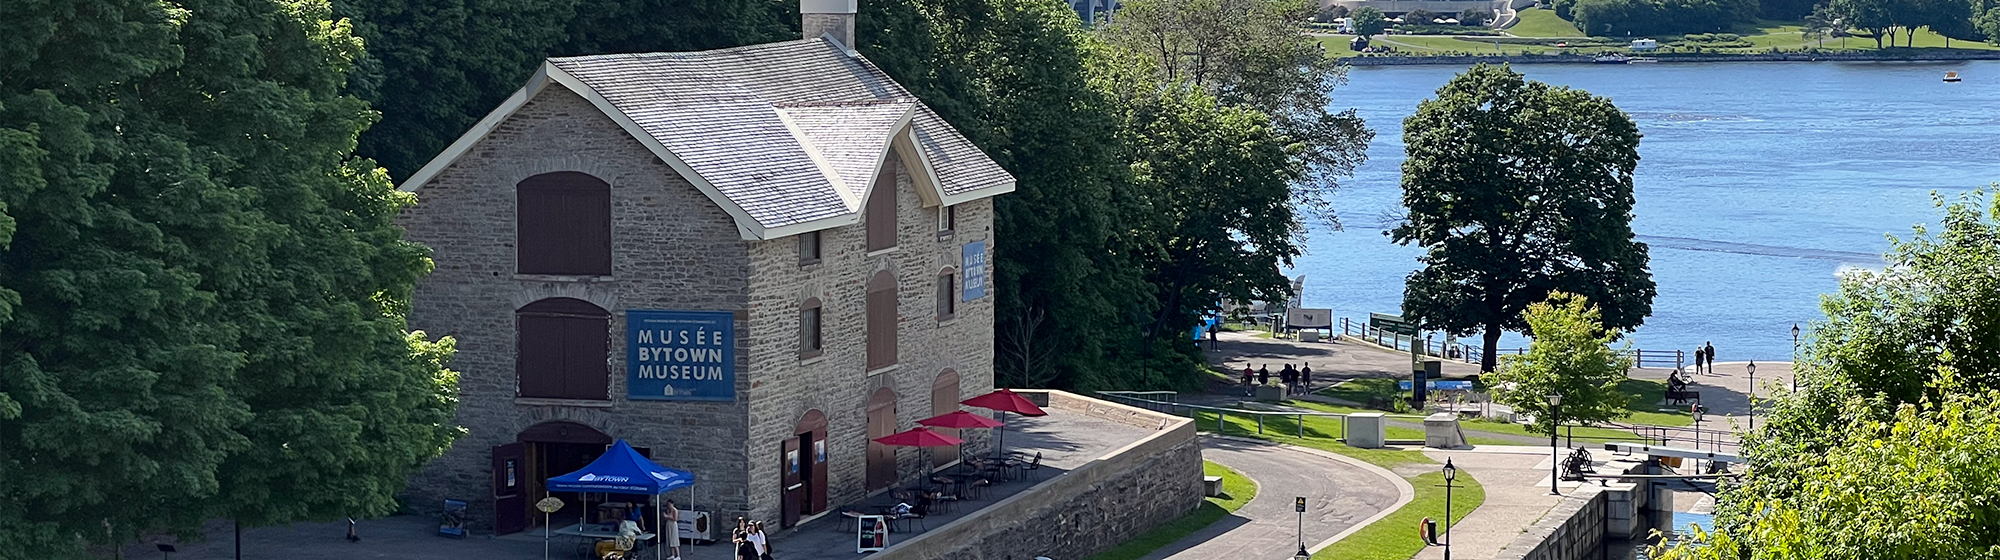 The Bytown Museum stone building, adjacent to the RIdeau Locks and the Ottawa River.